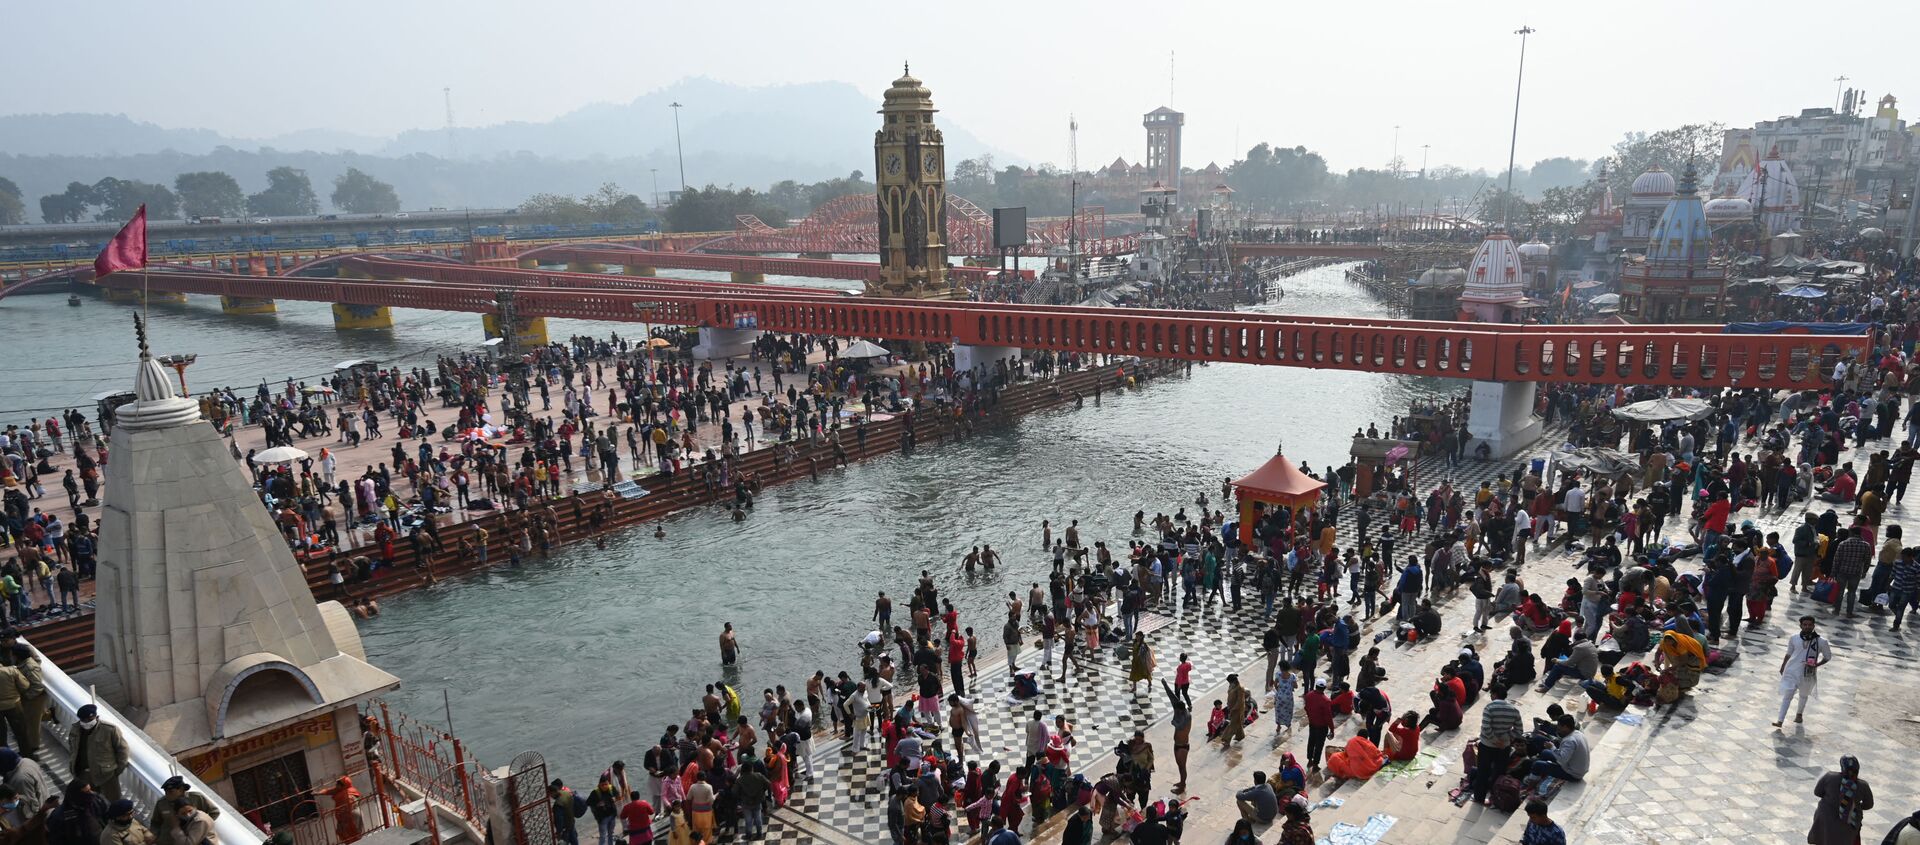 A general view shows Hindu devotees taking a holy dip in the waters of the River Ganges during Makar Sankranti, a day considered to be of great religious significance in the Hindu mythology, on the first day of the religious Kumbh Mela festival in Haridwar on January 14, 2021.  - Sputnik International, 1920, 10.03.2021